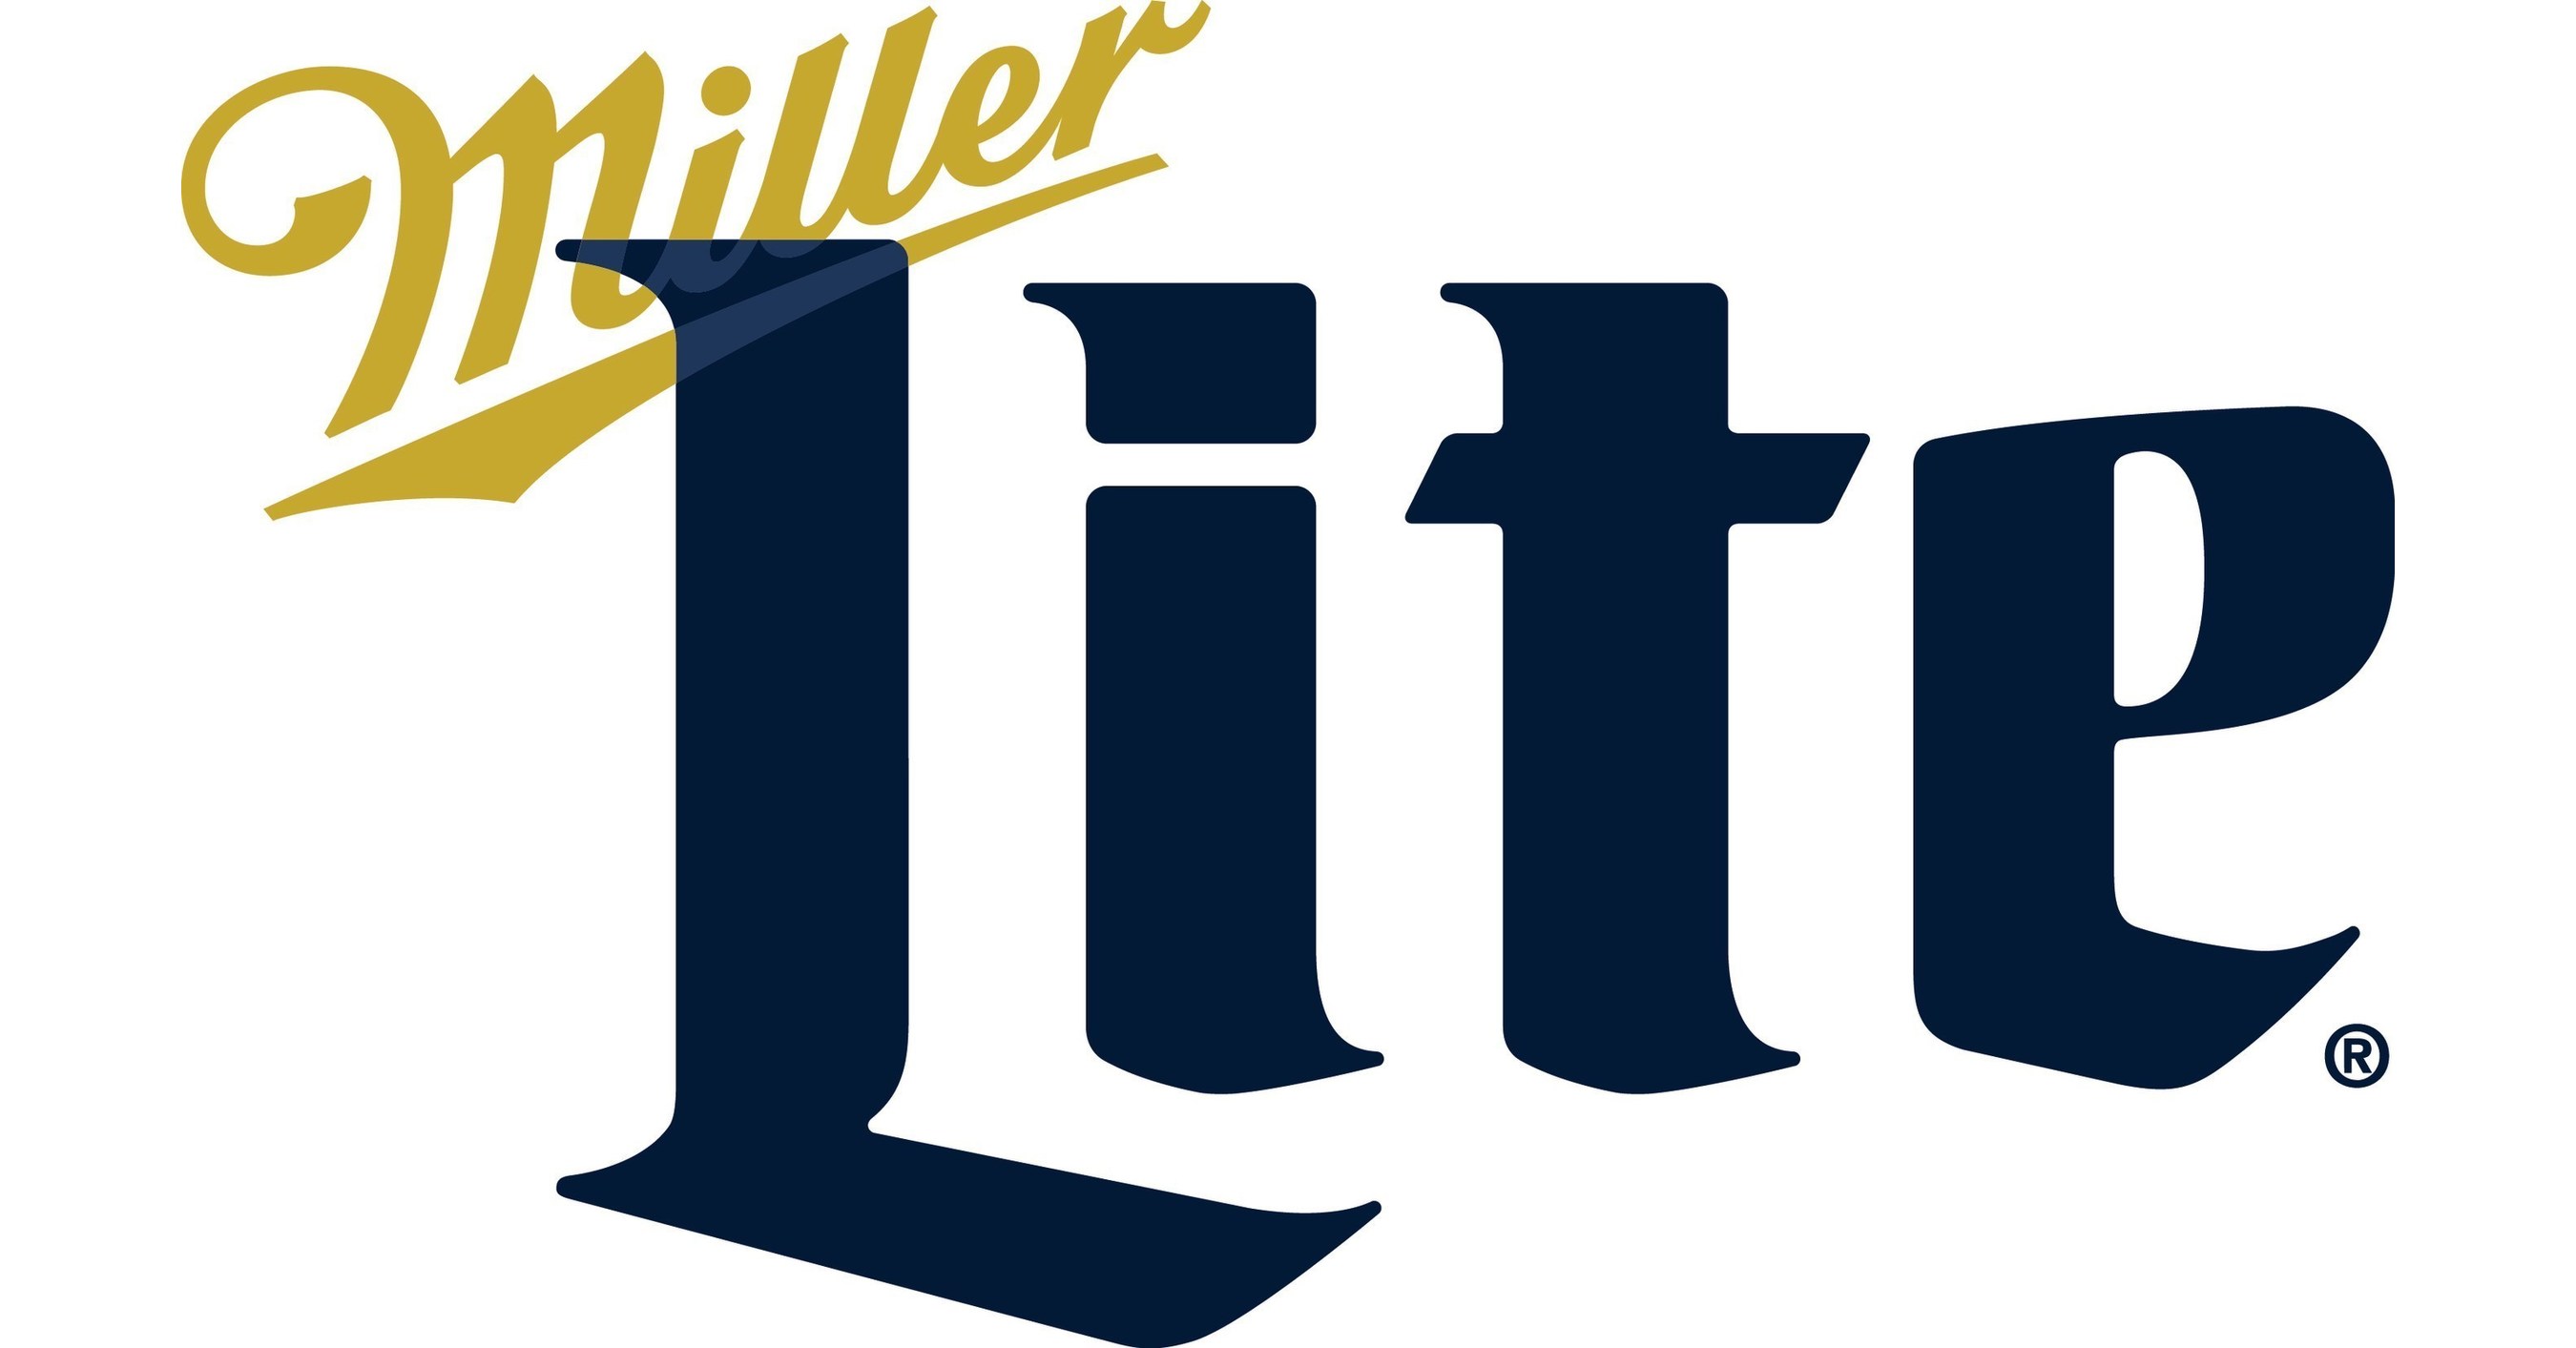 miller-lite-celebrates-lgbtq-history-month-with-beers-and-queer